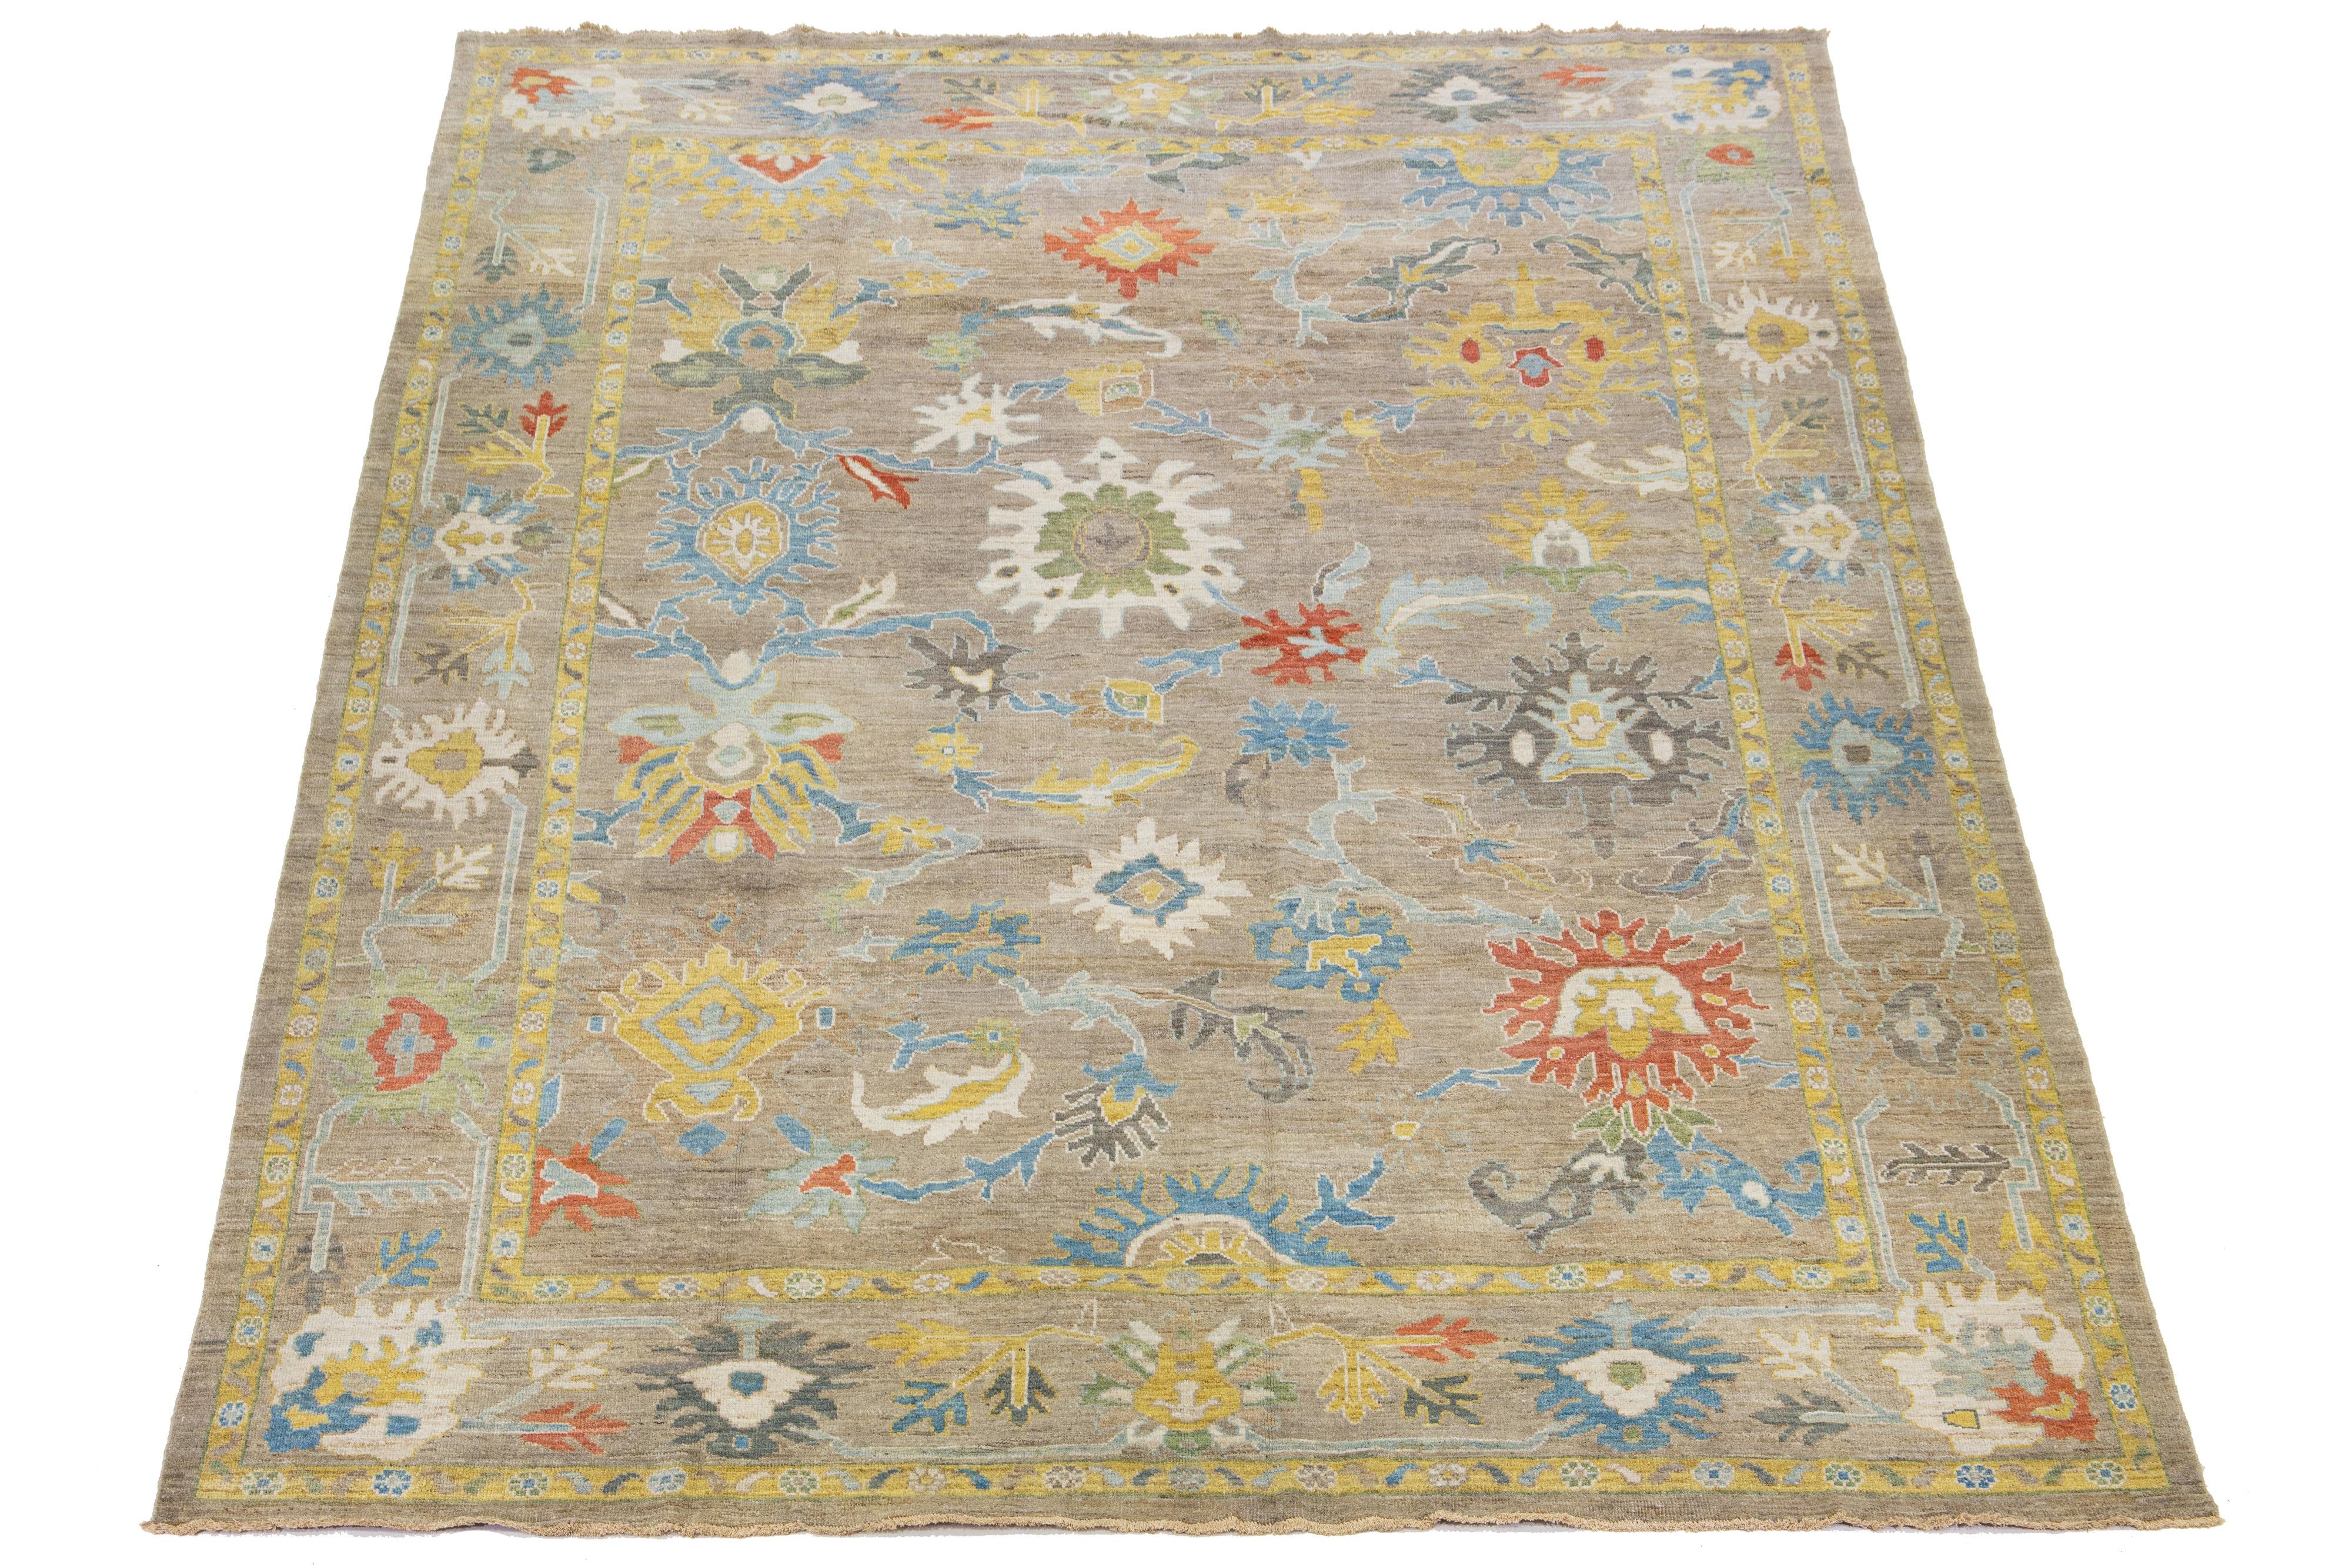 Beautiful modern Sultanabad hand-knotted wool rug with a light brown field. This Sultanabad rug has a designed frame and multicolor accents in a gorgeous classic floral pattern.

This rug measures 10'3